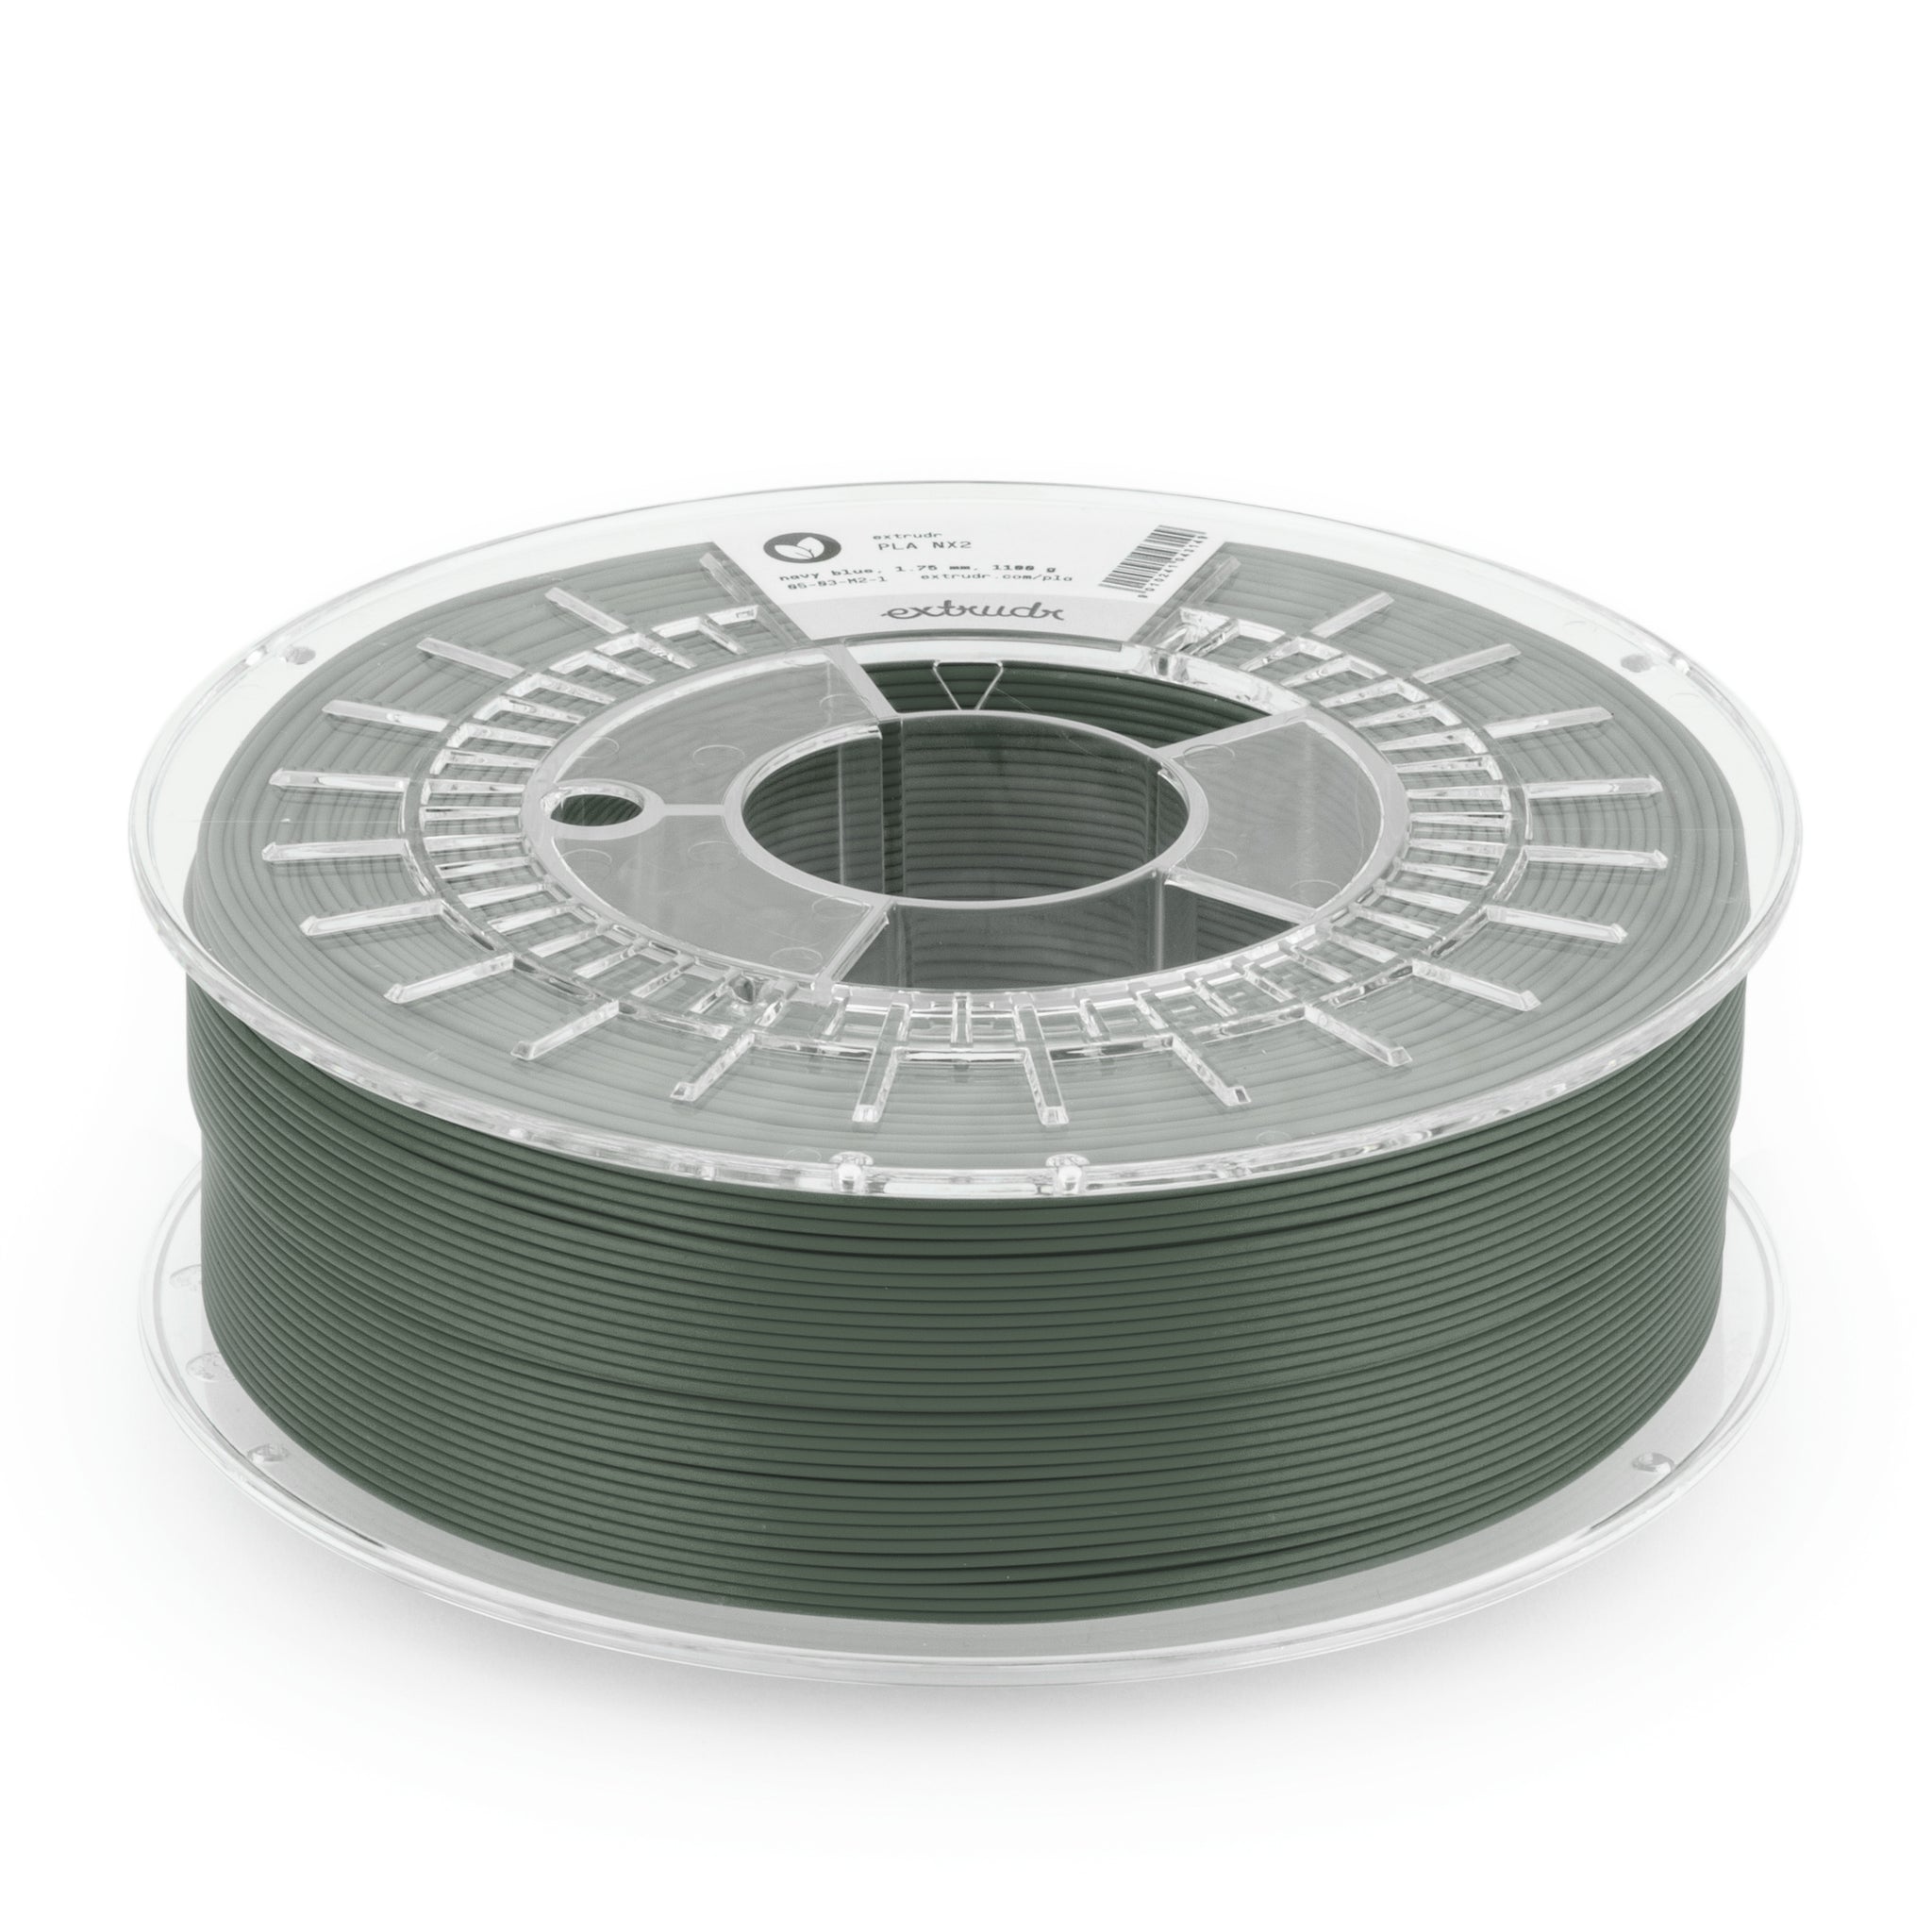 Extrudr PLA NX2 - Military Green [1.75mm] (25,90€/Kg)